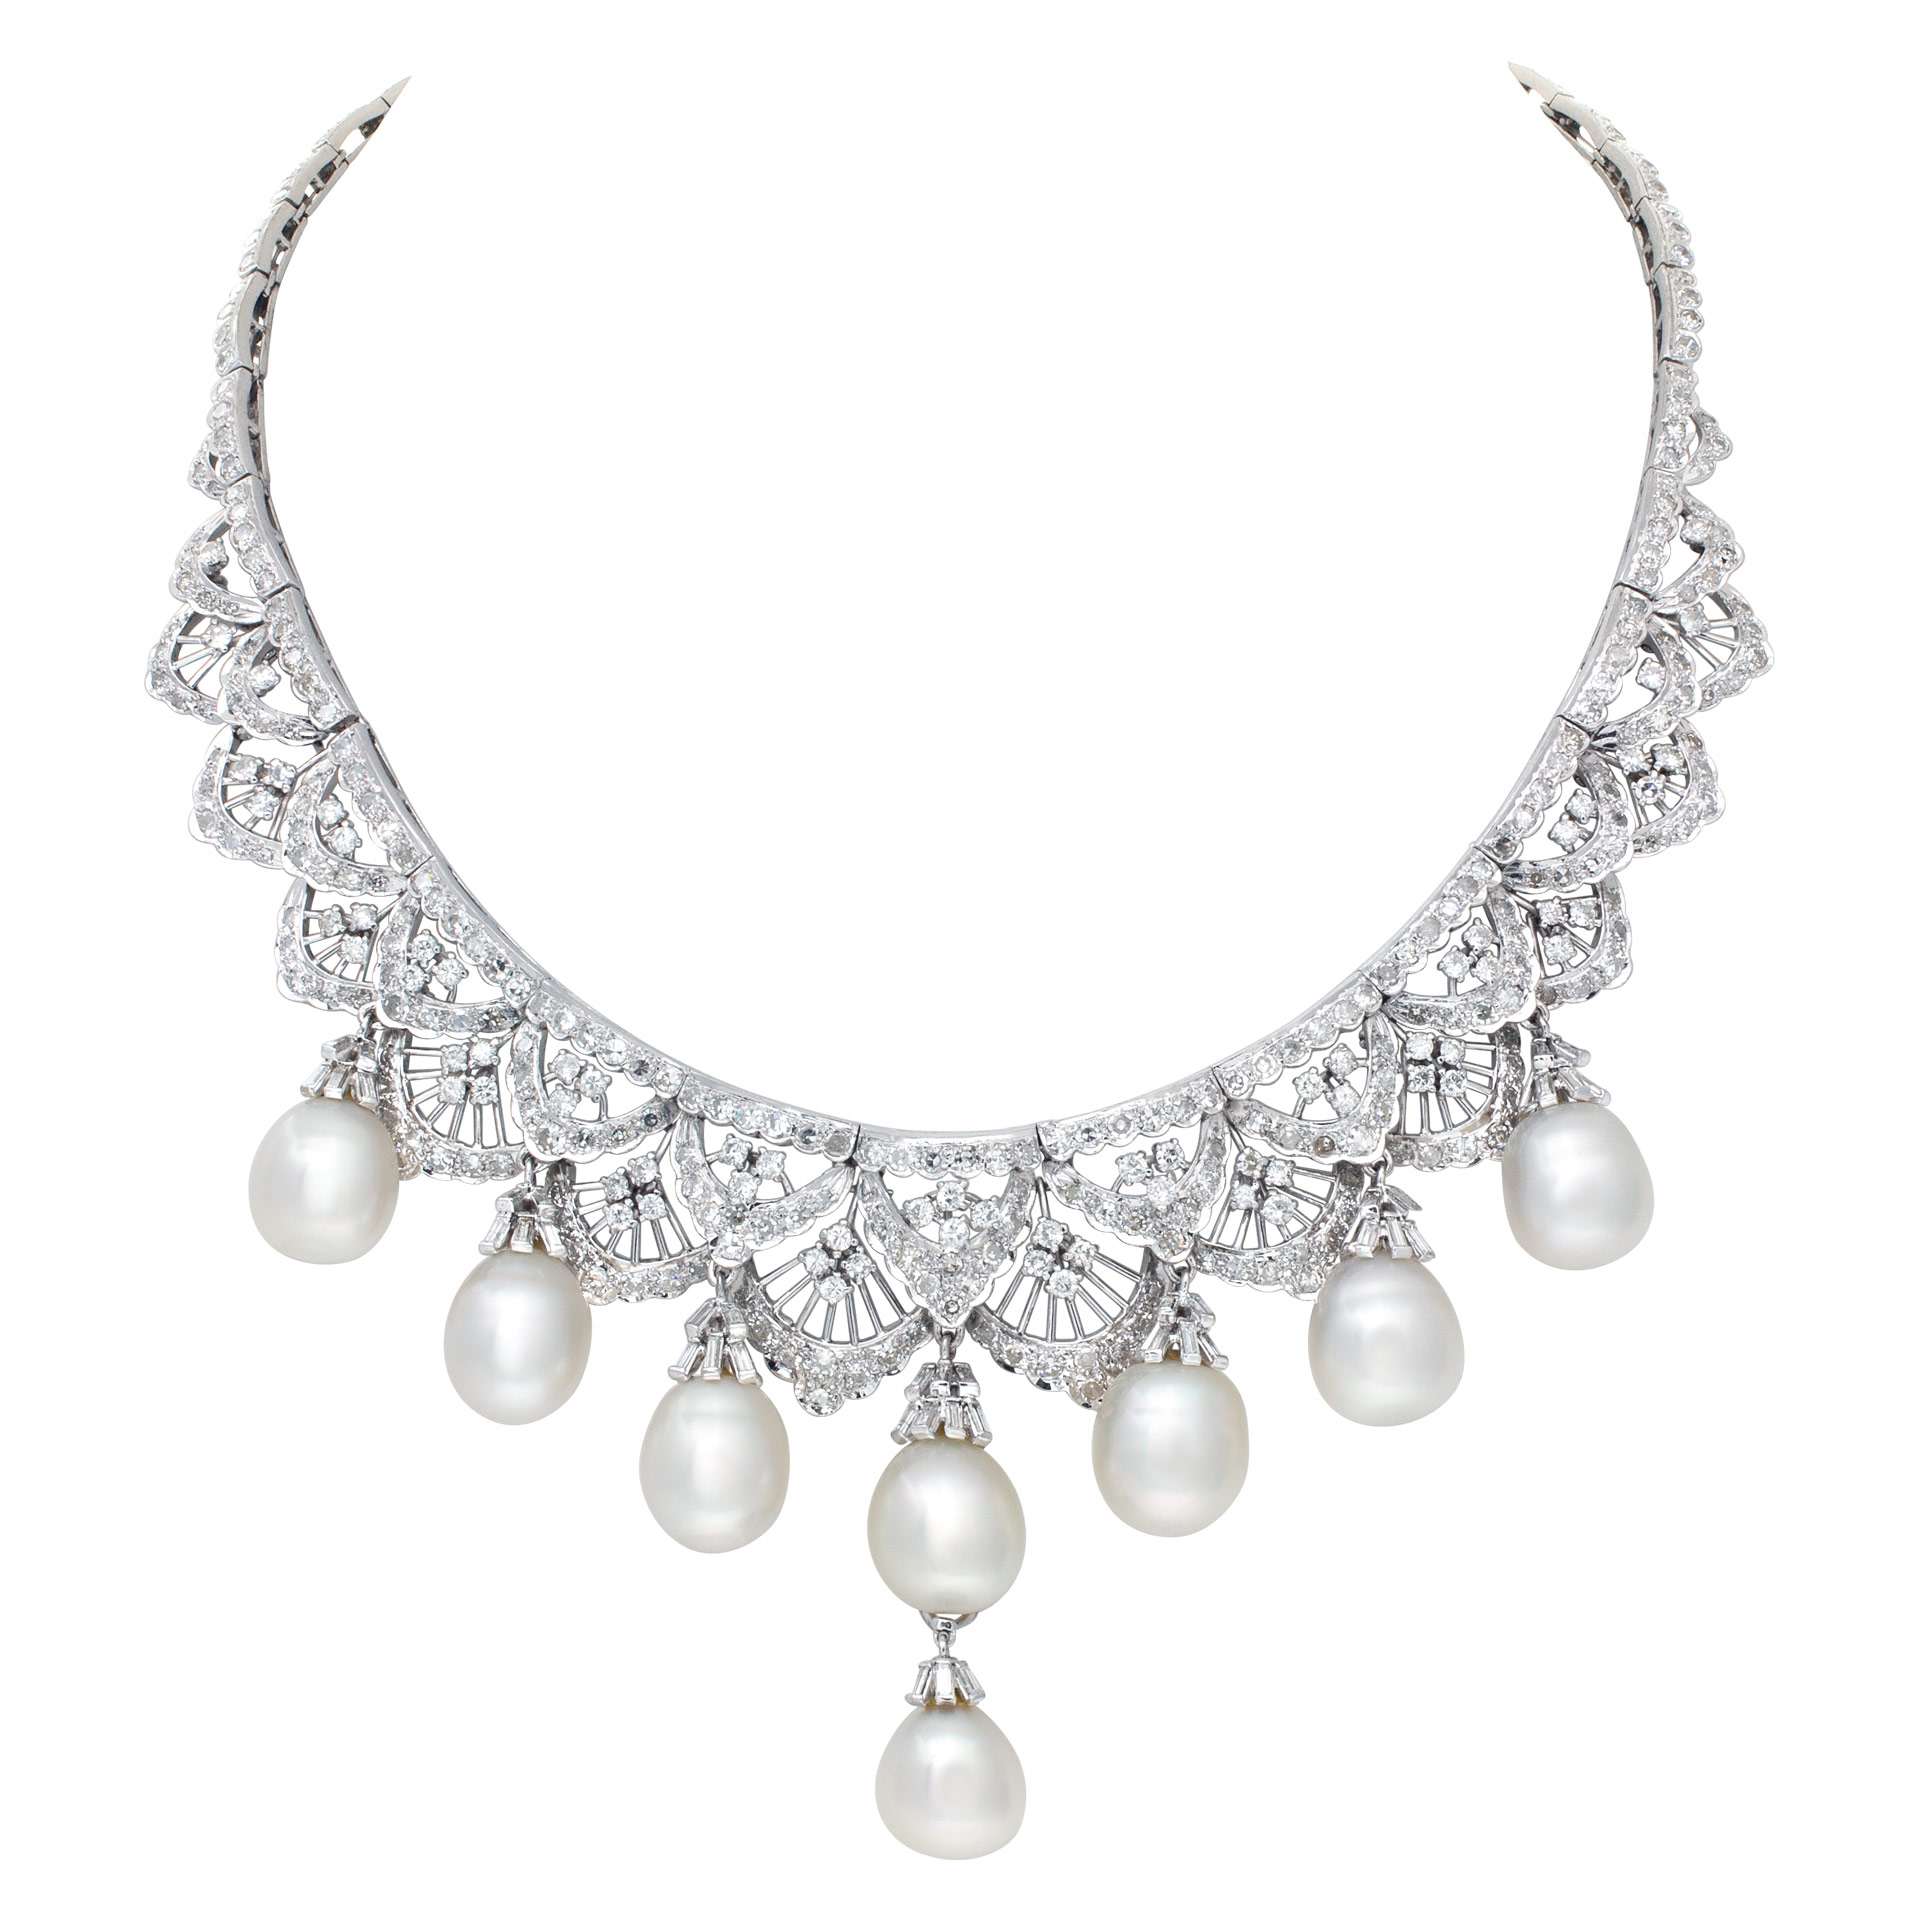 Spectacular Diamonds Necklace With Oval Shaped South Sea Peals. Over 8 Carats Full Cut Round Brilliant Diamonds. image 1